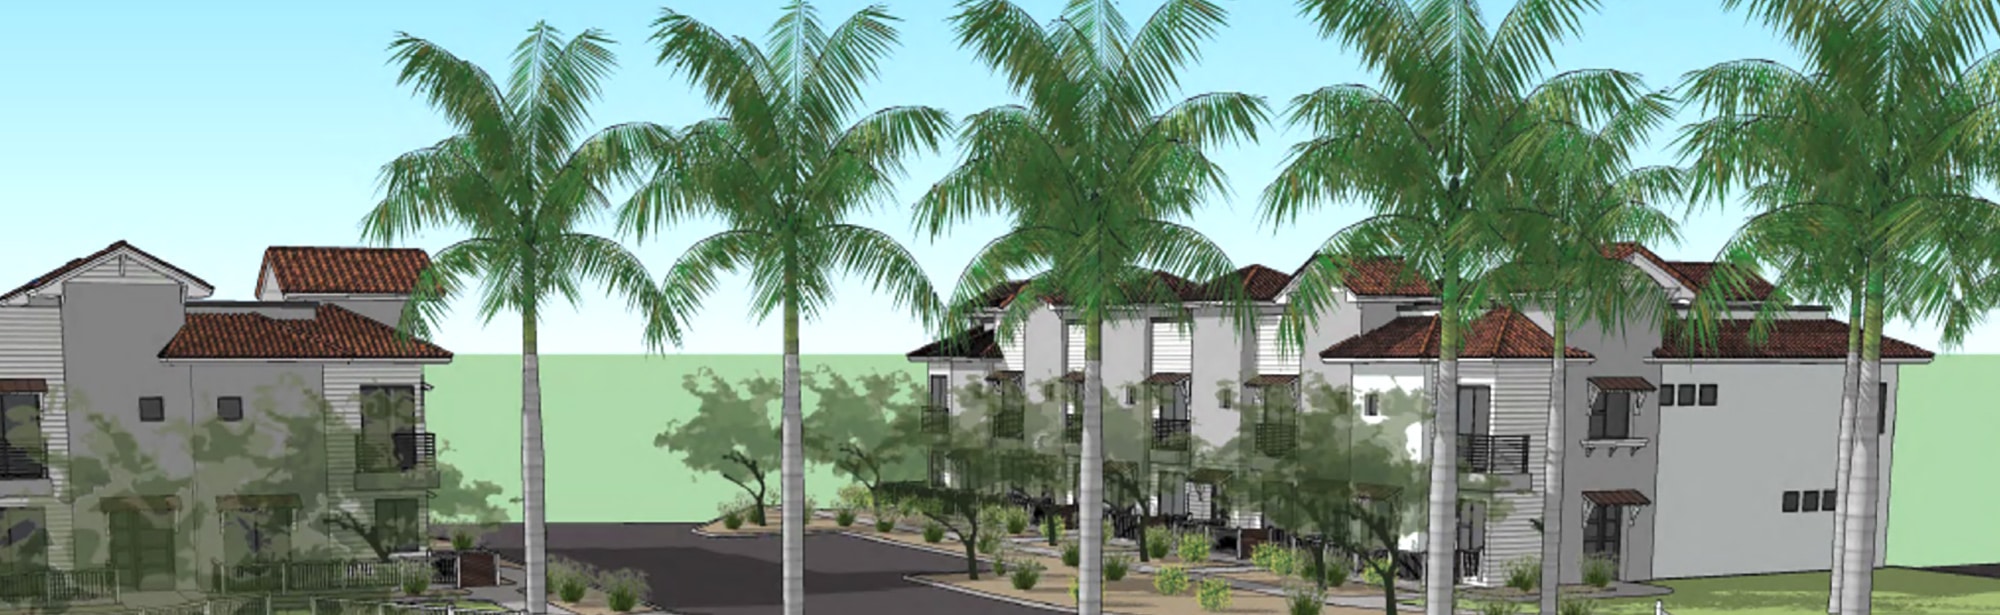 Development of For-Rent Townhome Community - Investment